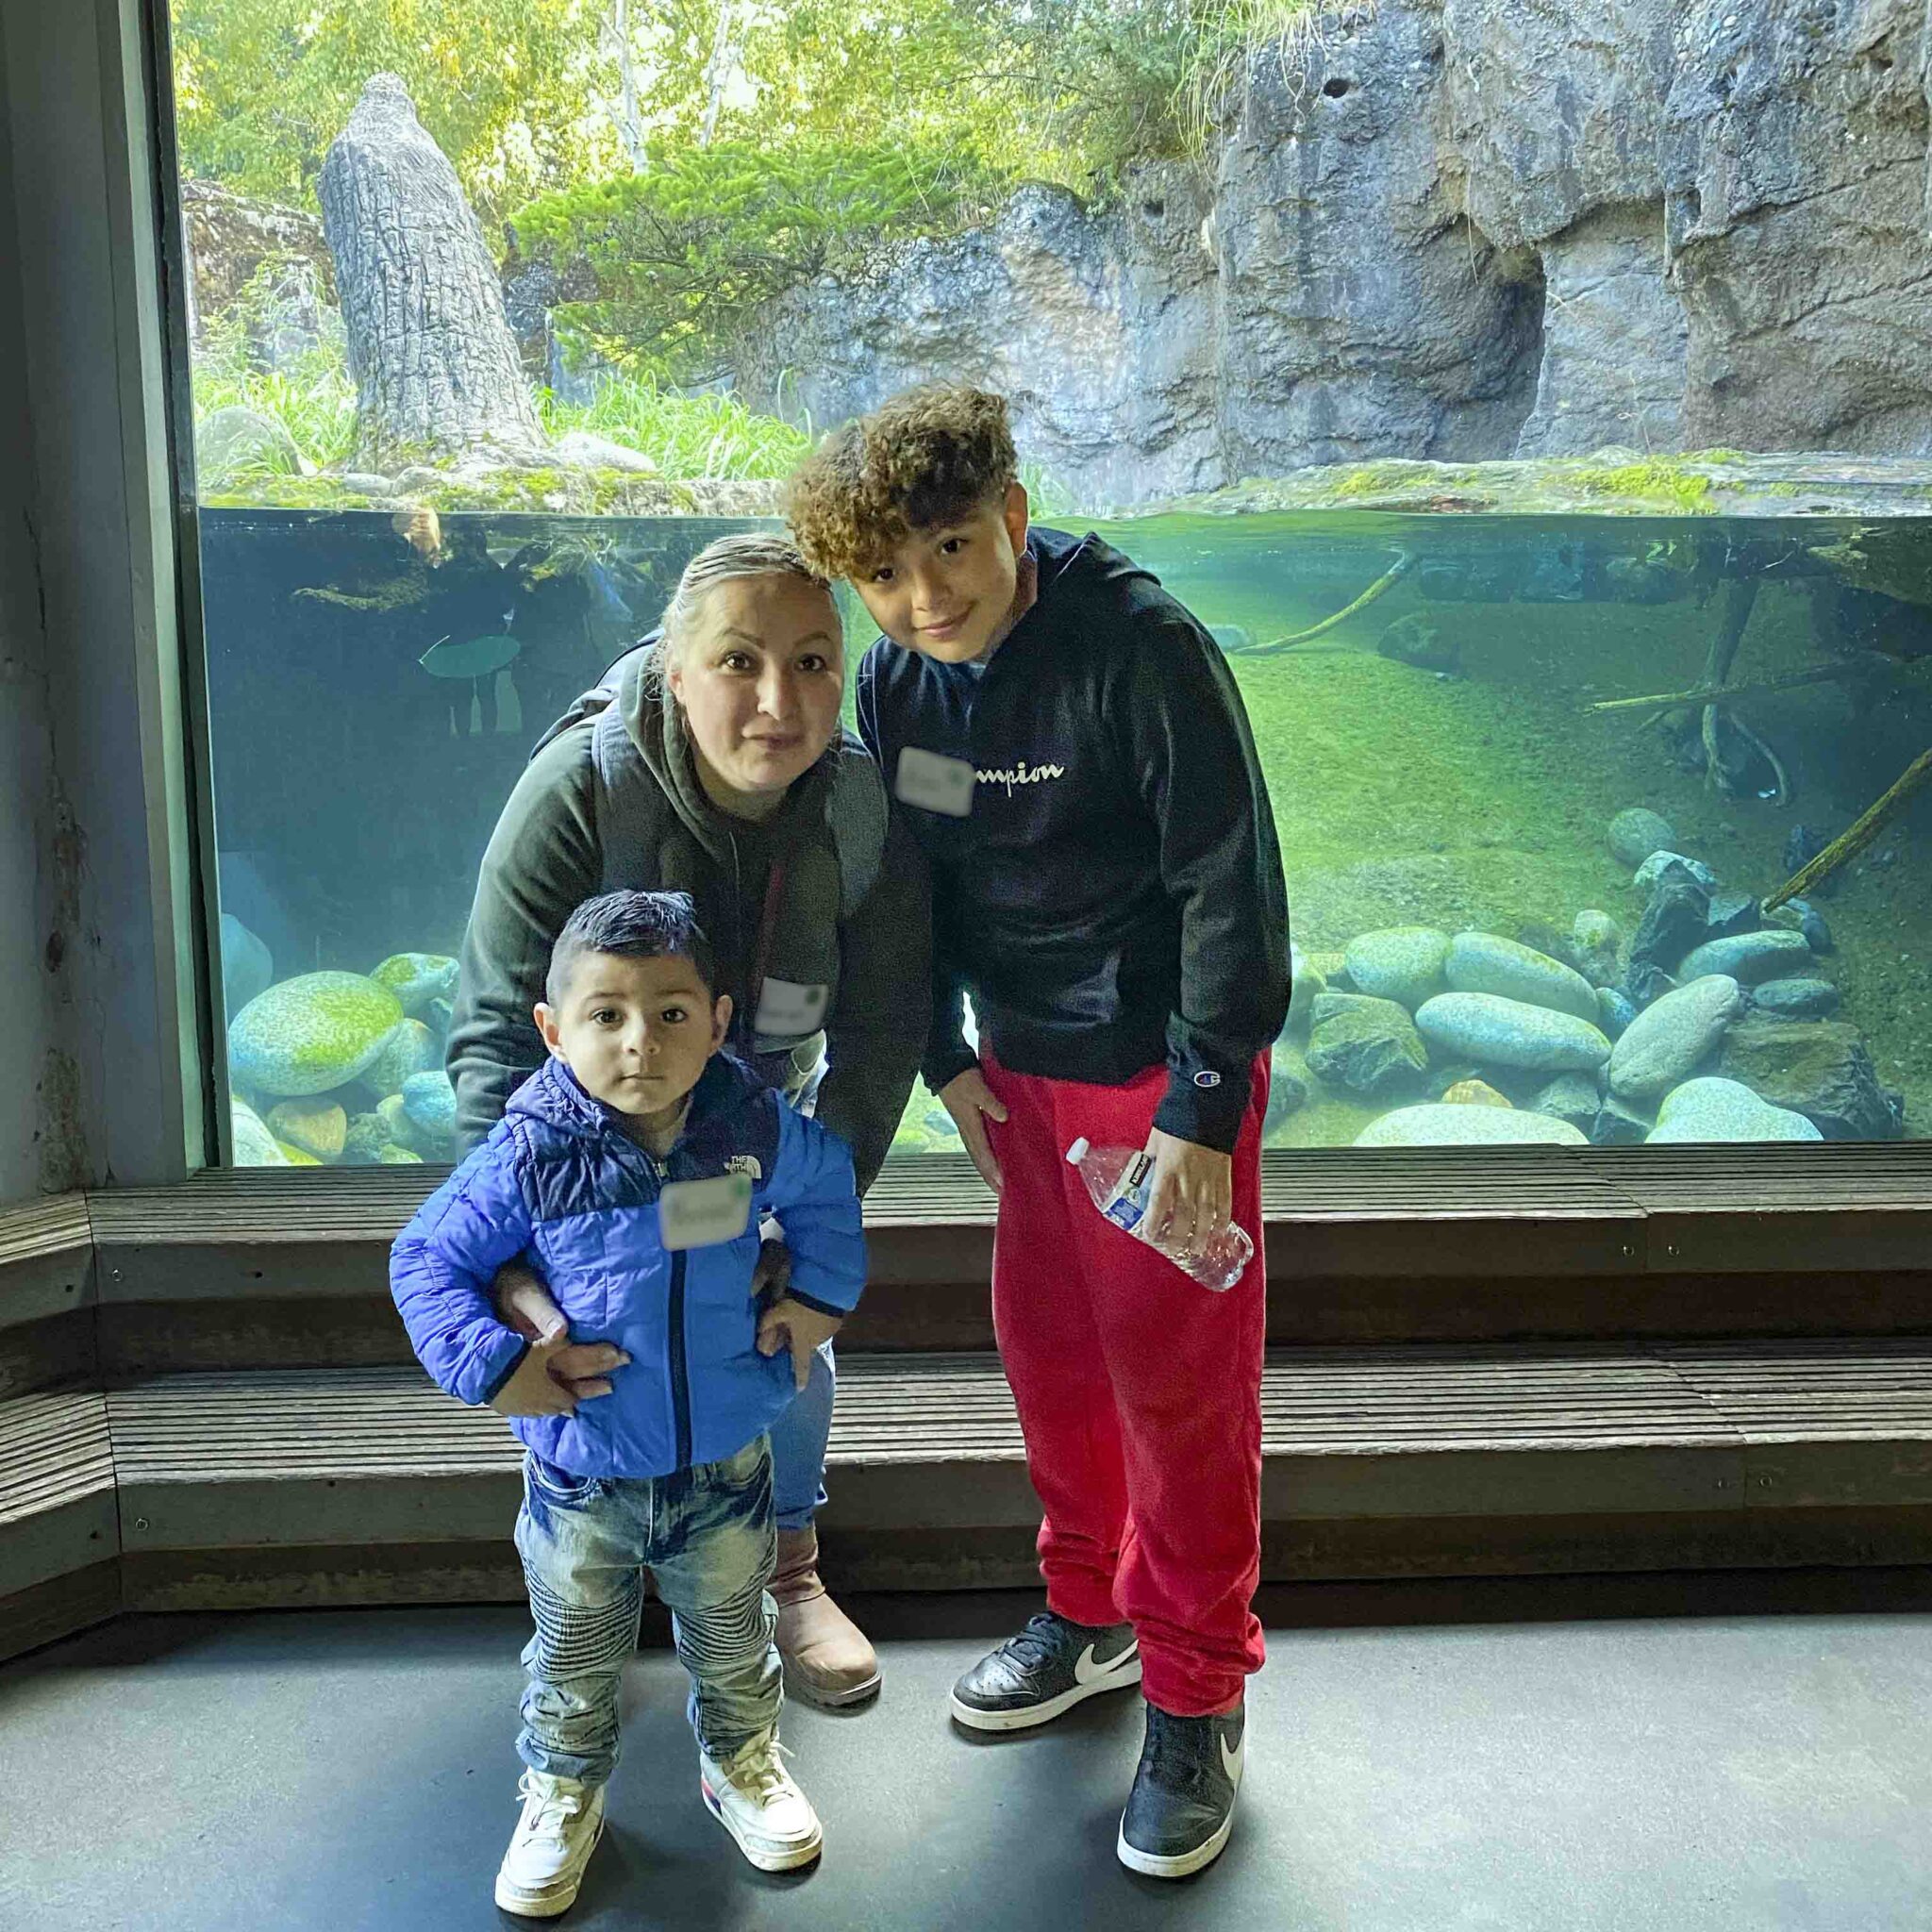 Group photo of family posing for camera standing in front of a glass aquarium tank